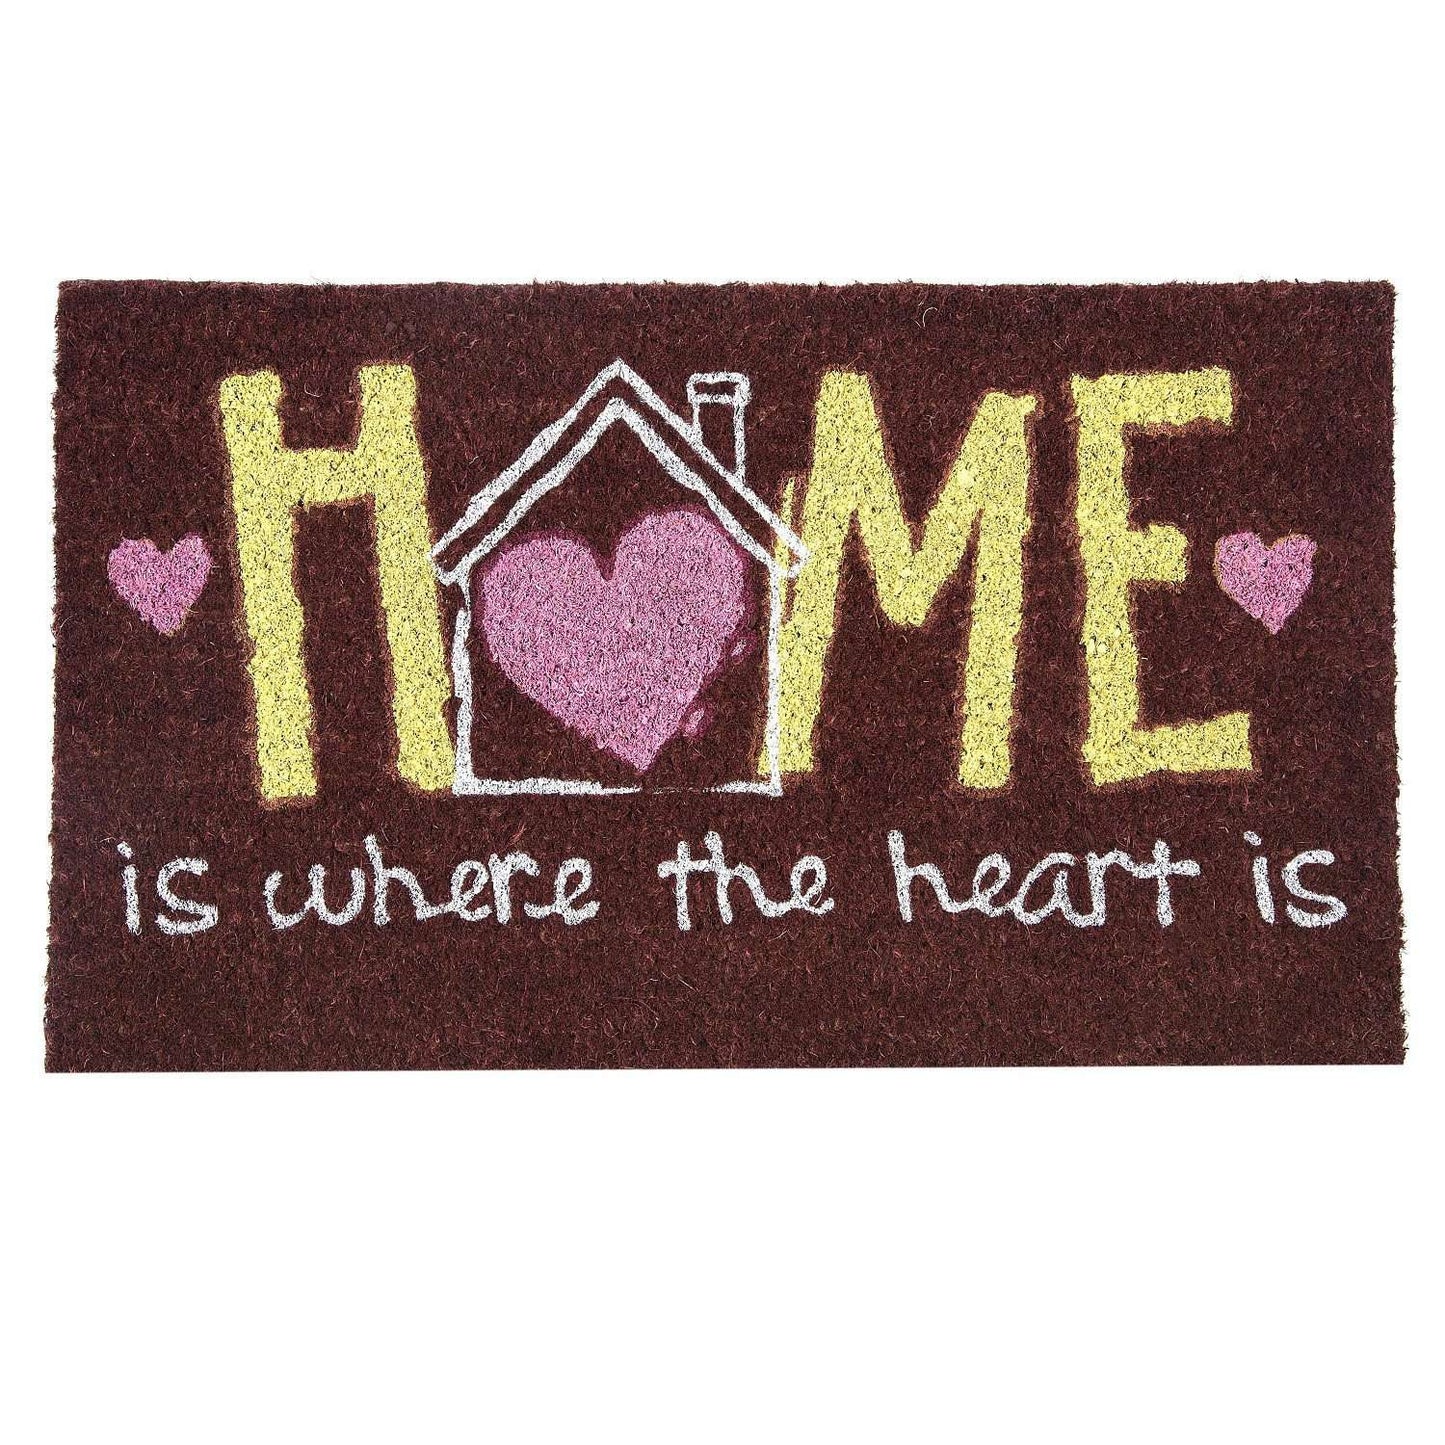 SWHF Premium Coir and Rubber Quirky Design Door and Floor Mat : Home is Where the Heart is - SWHF